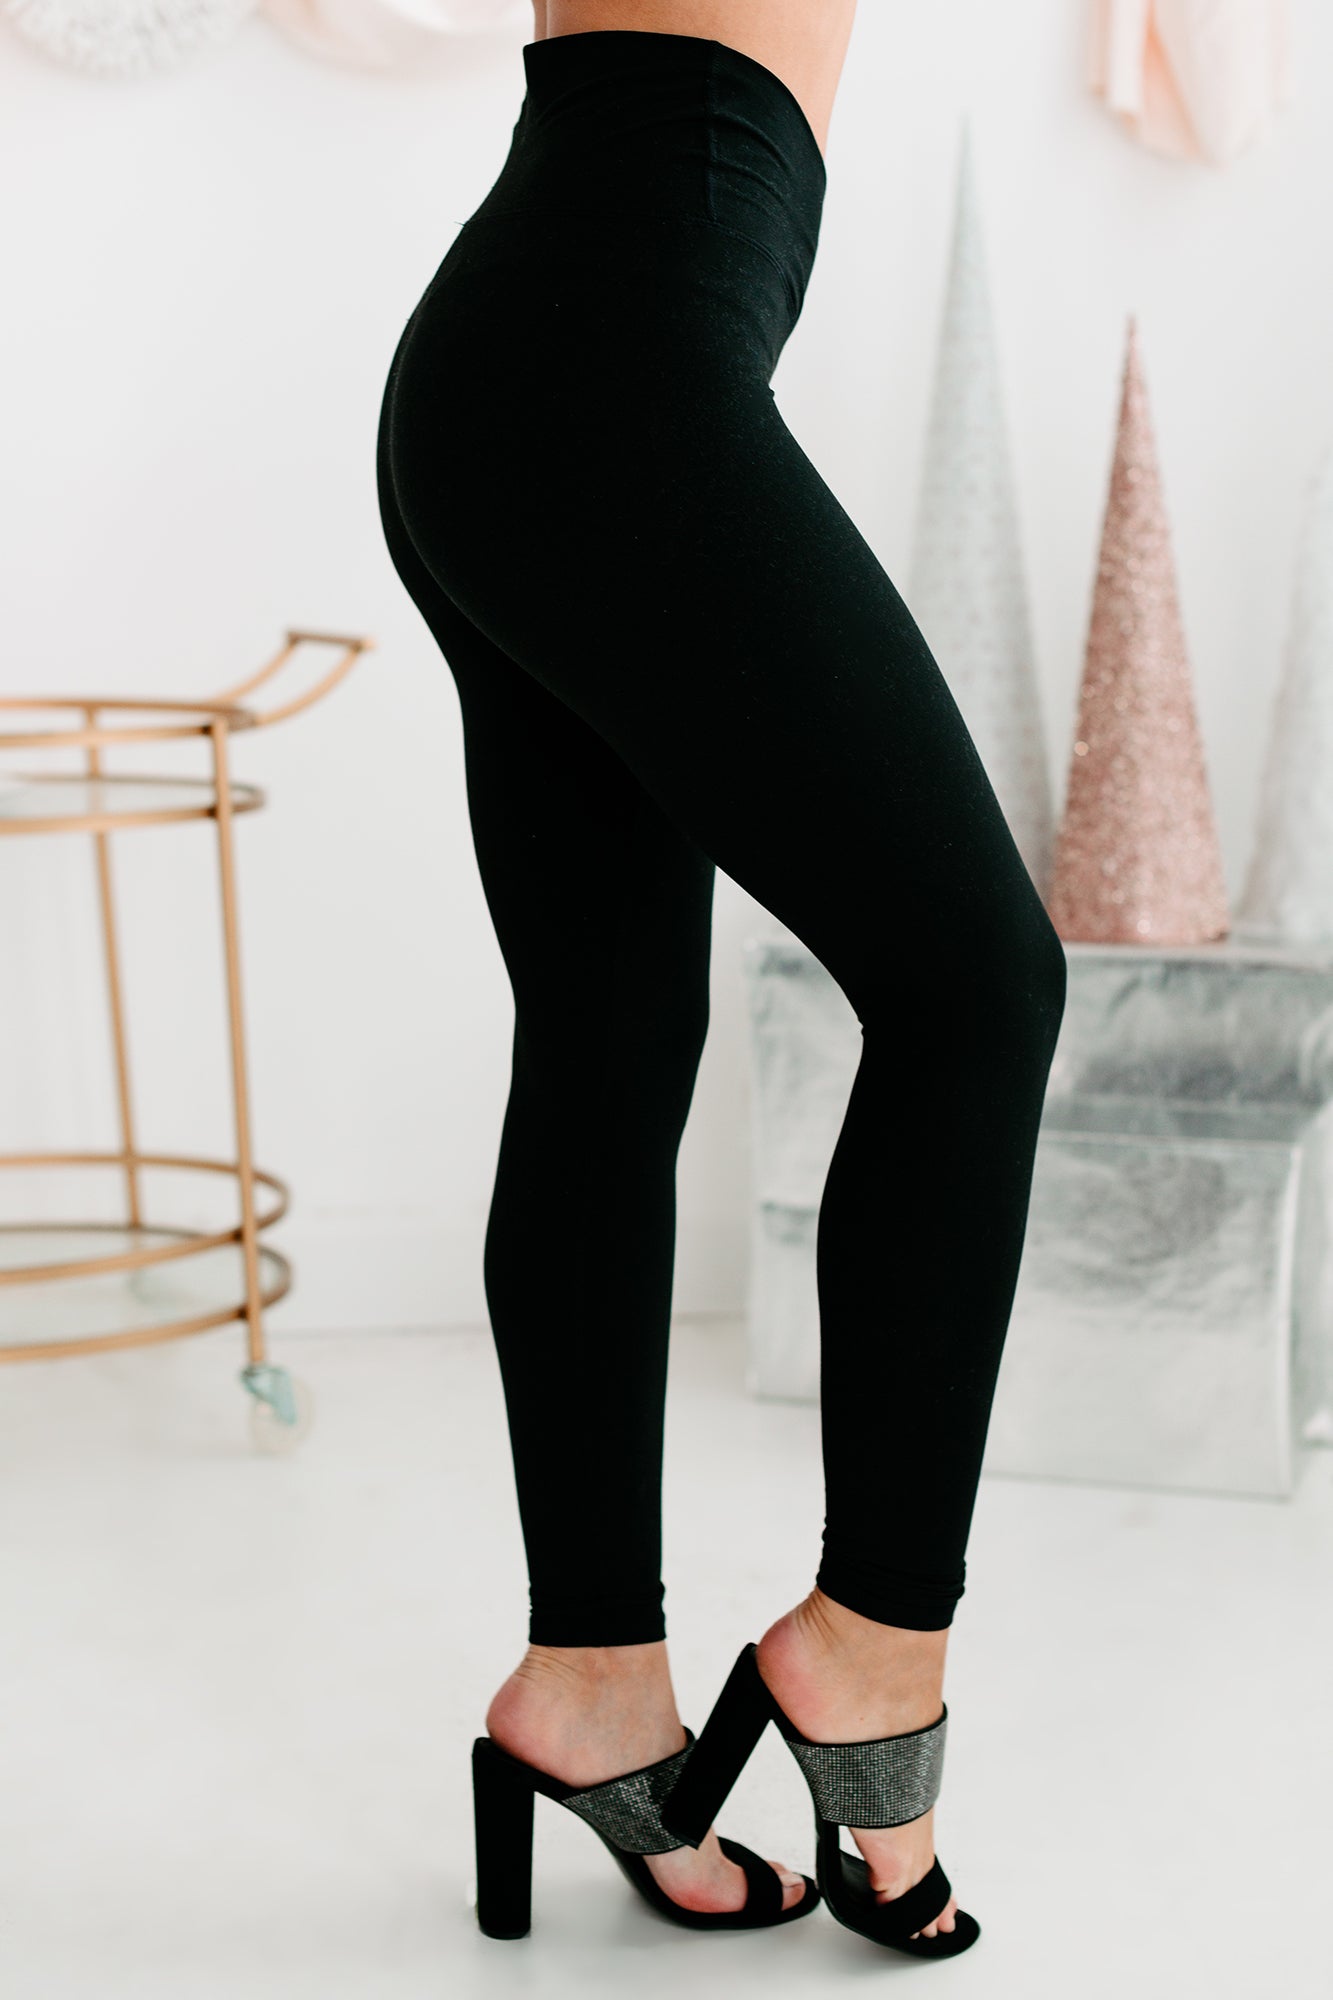 Does Spanx Have Military Discounts? - Shop ID.me